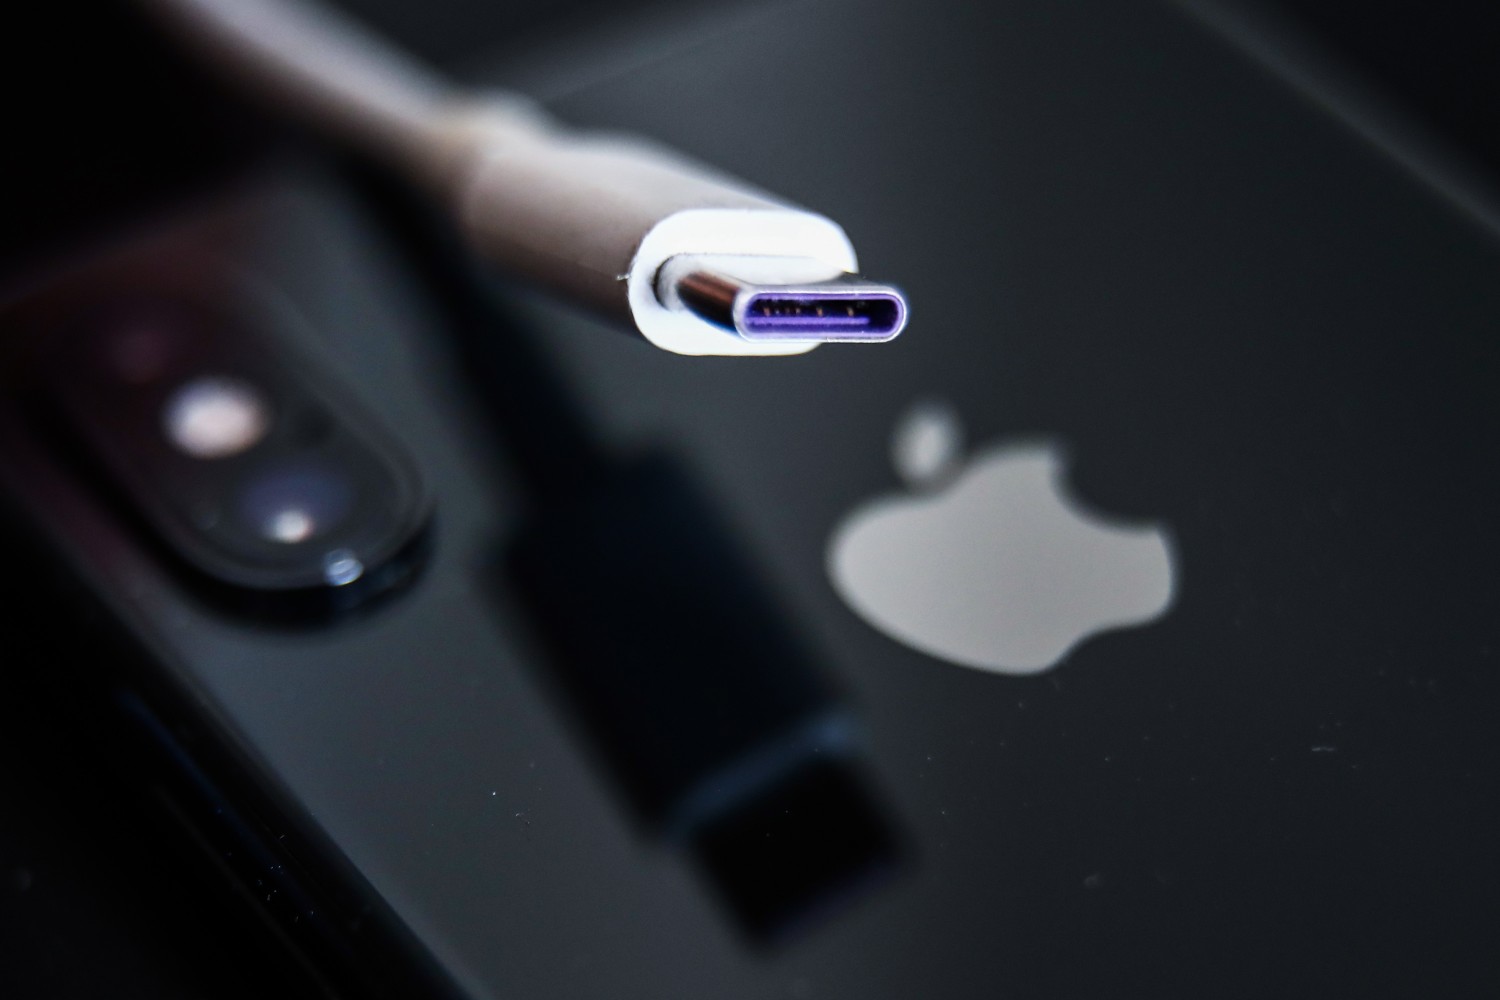 A USB-C cable and Apple Inc. iPhone. A USB-C cable and Apple Inc. iPhone.Photographer: Jakub Porzycki/NurPhoto/Getty Images